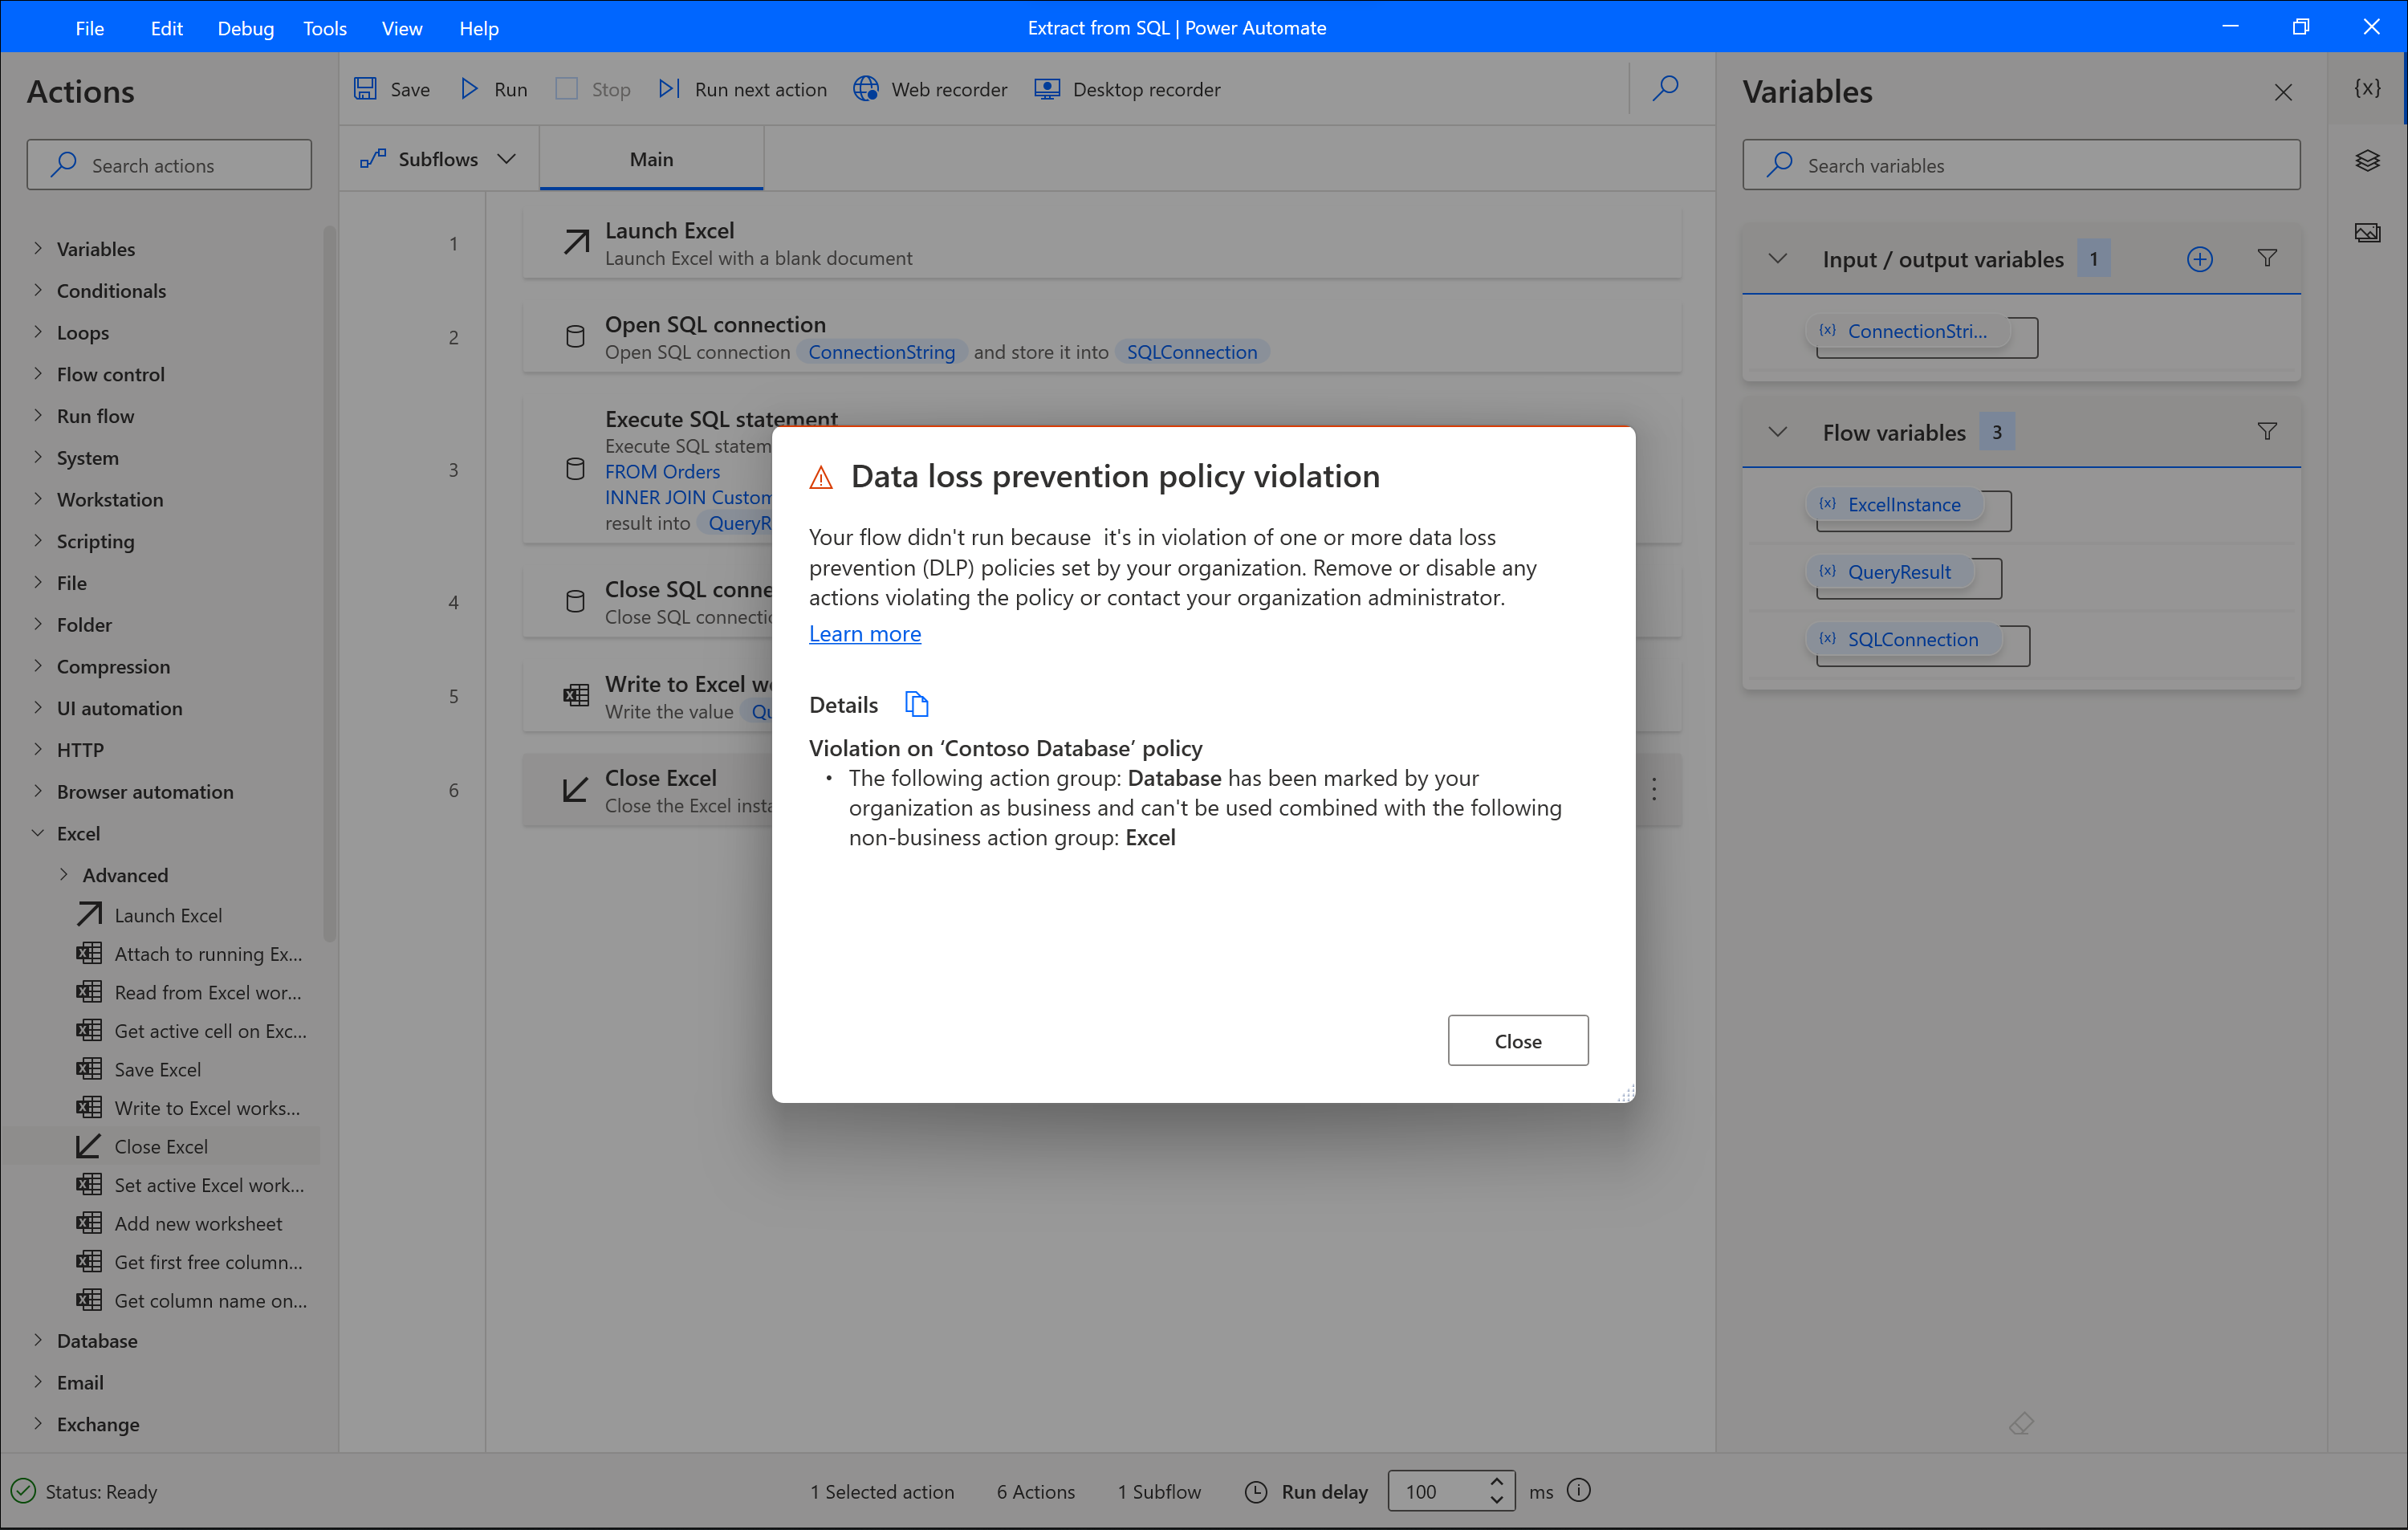 Screenshot of the Data loss prevention policy violation message.